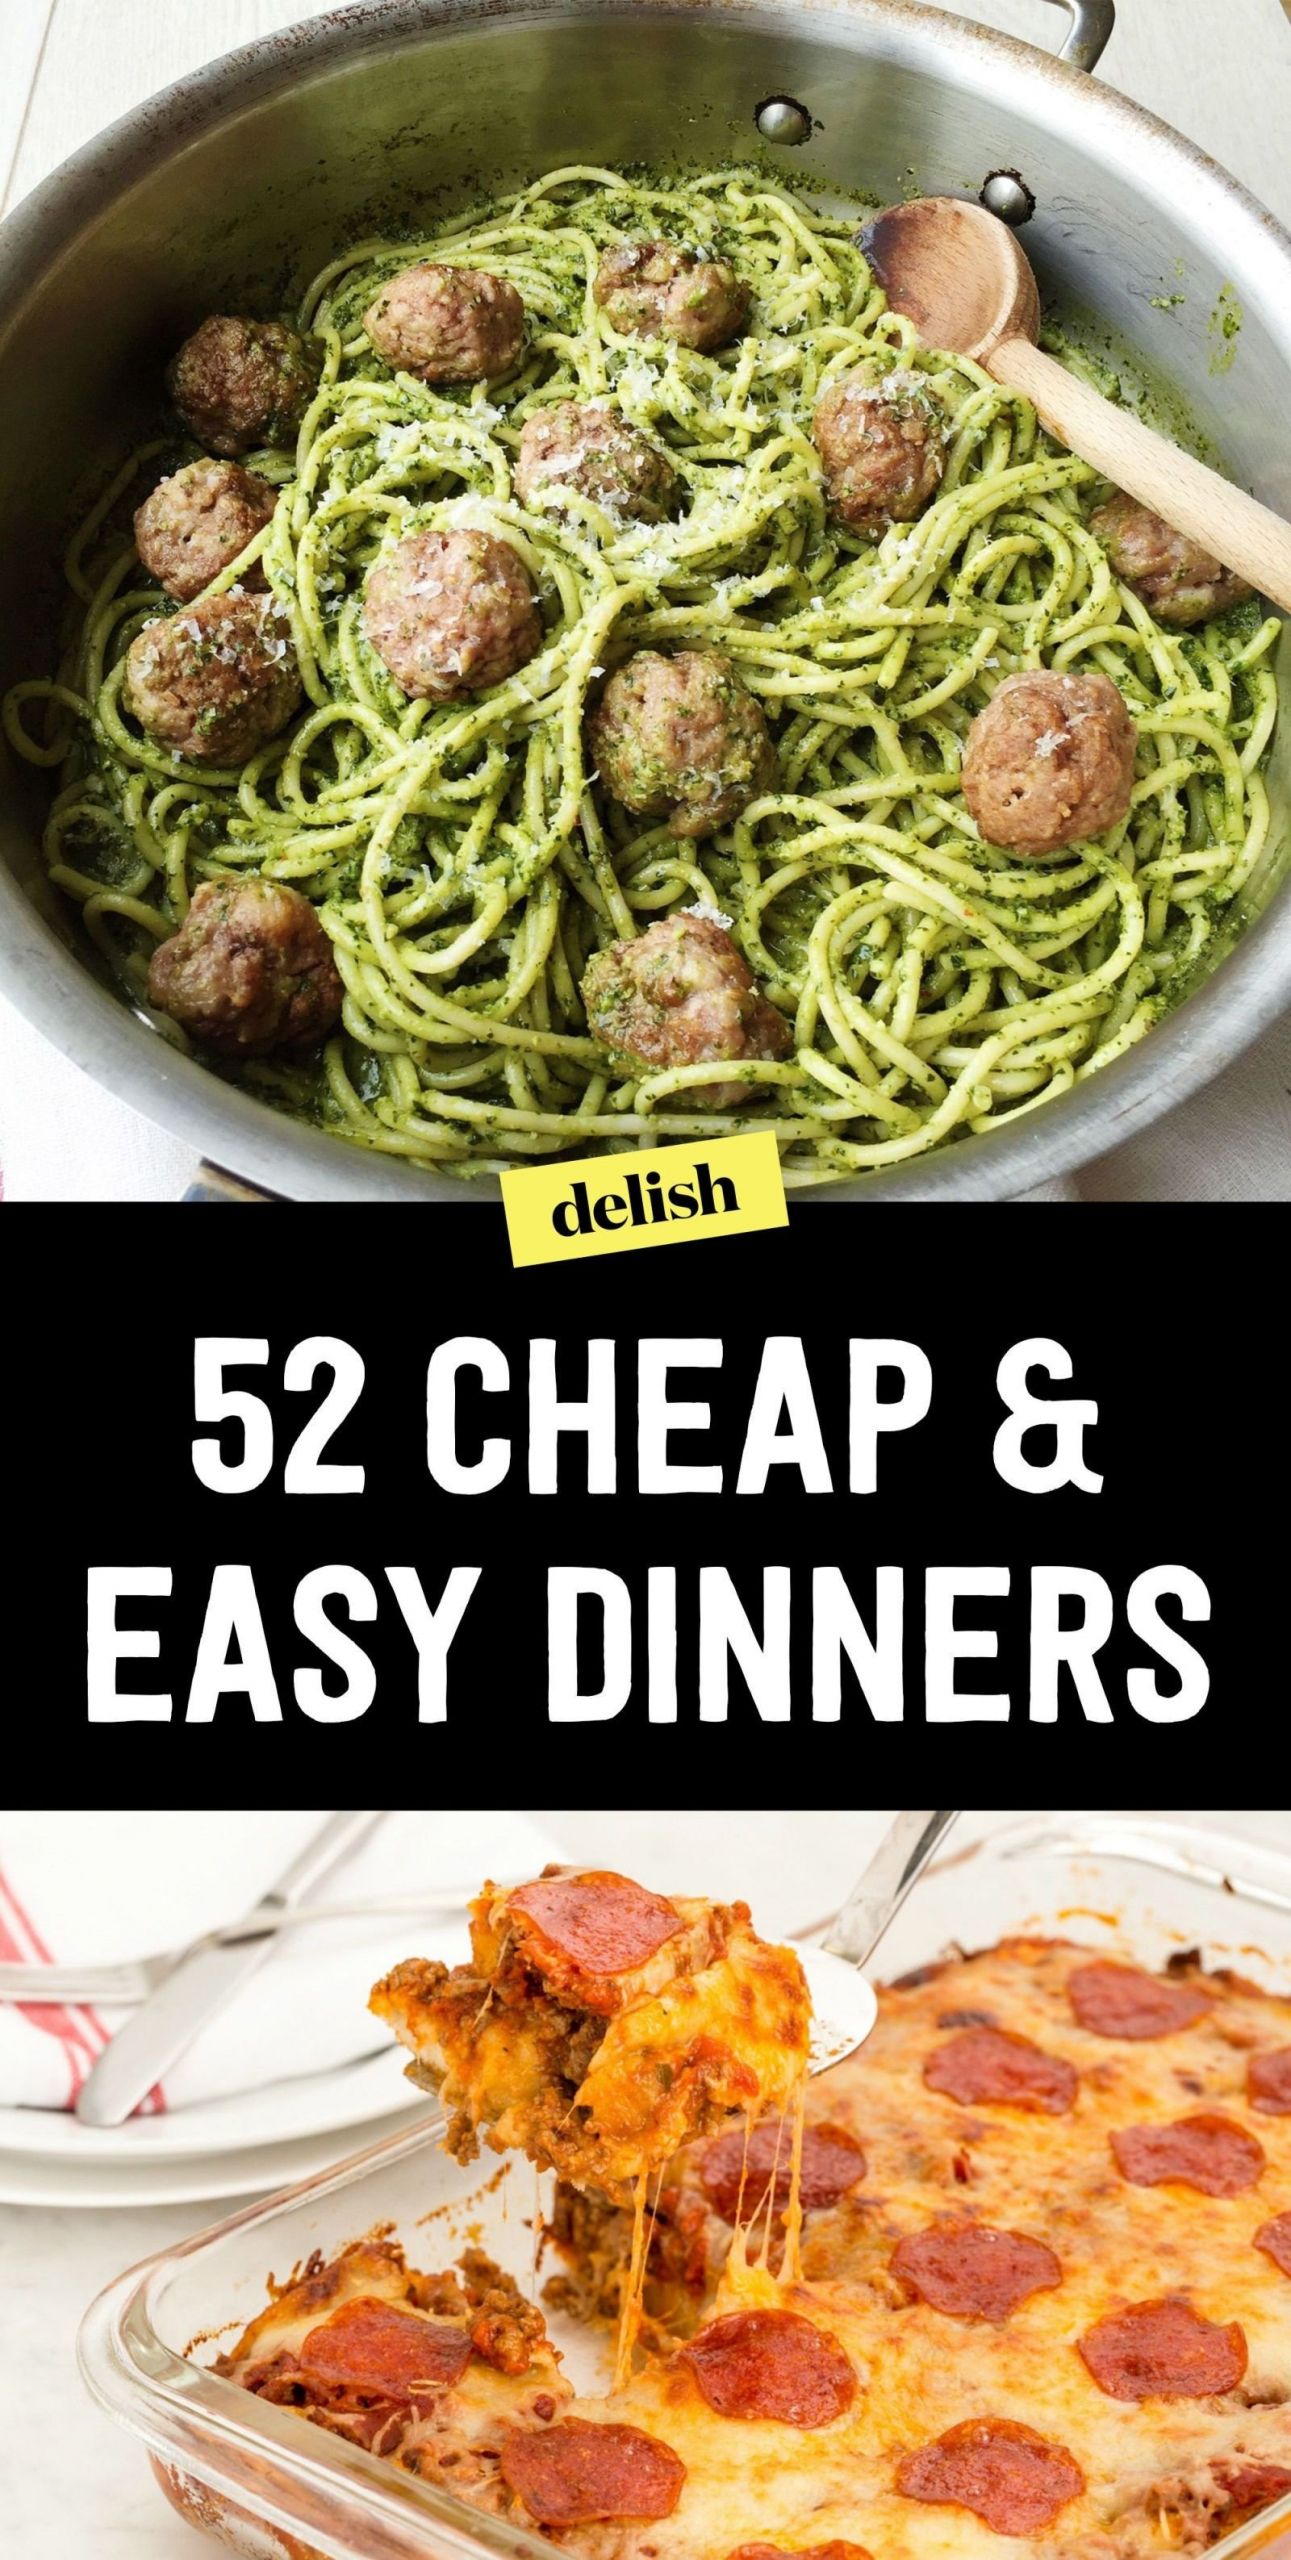 Great Dinners For Two
 10 Great Cheap Meal Ideas For 2 2019